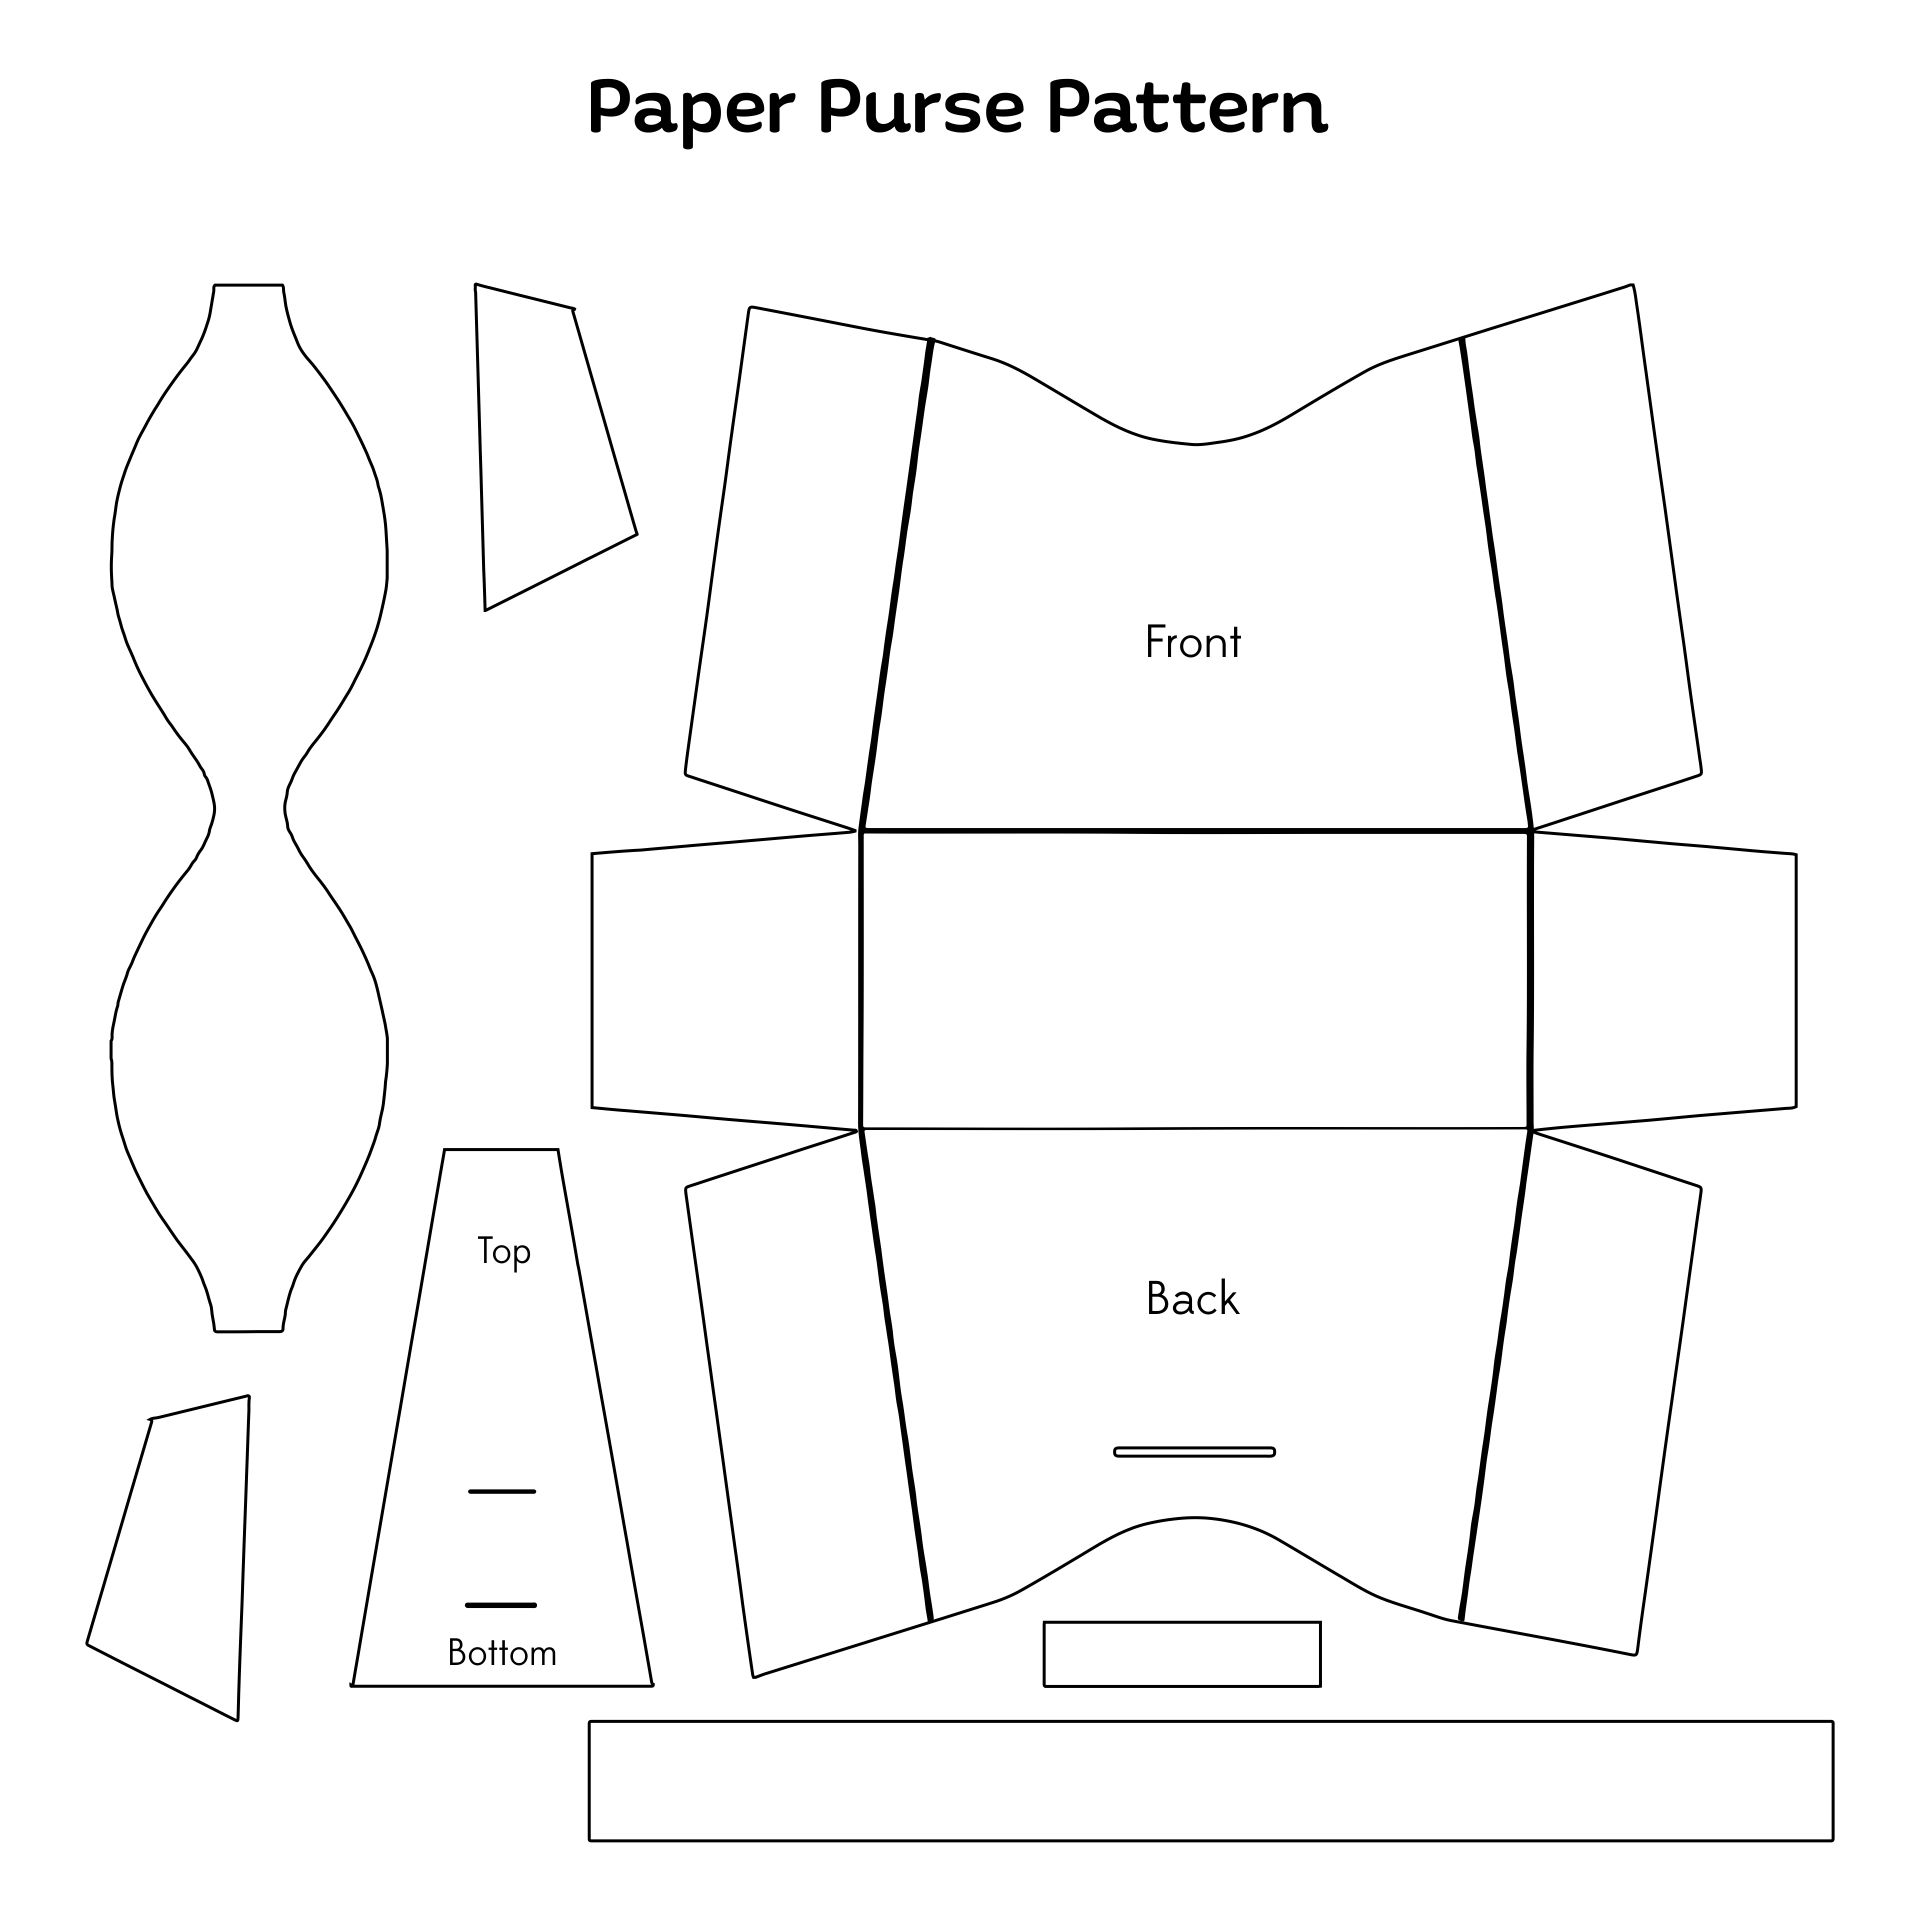 7 Best Images of Free Printable Paper Purse Templates Printable Paper